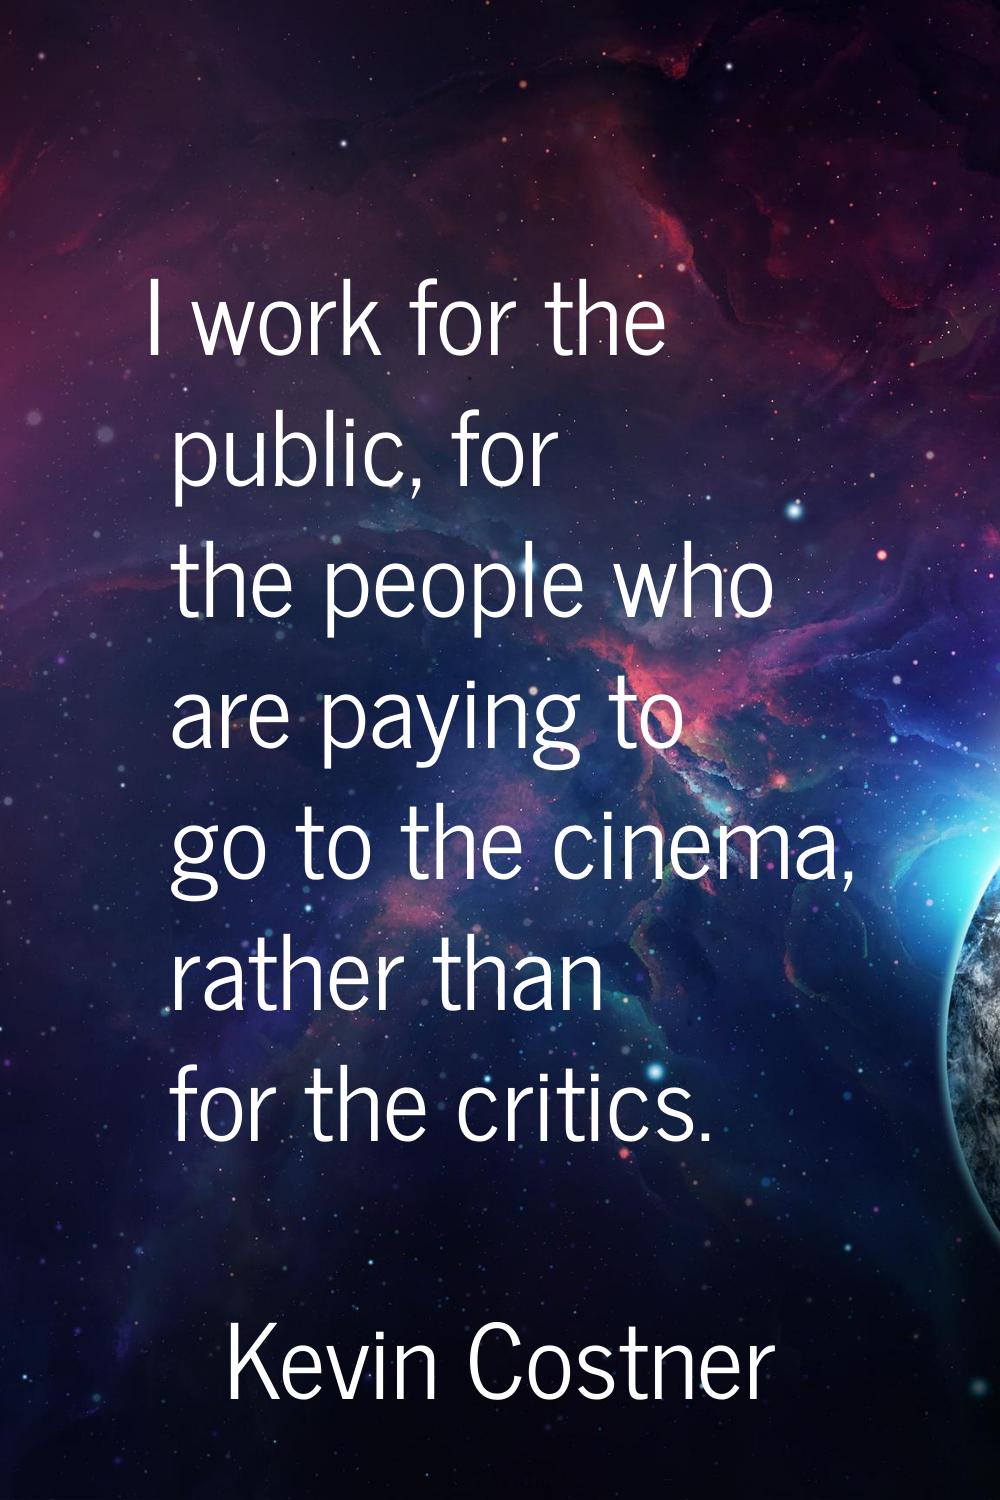 I work for the public, for the people who are paying to go to the cinema, rather than for the criti